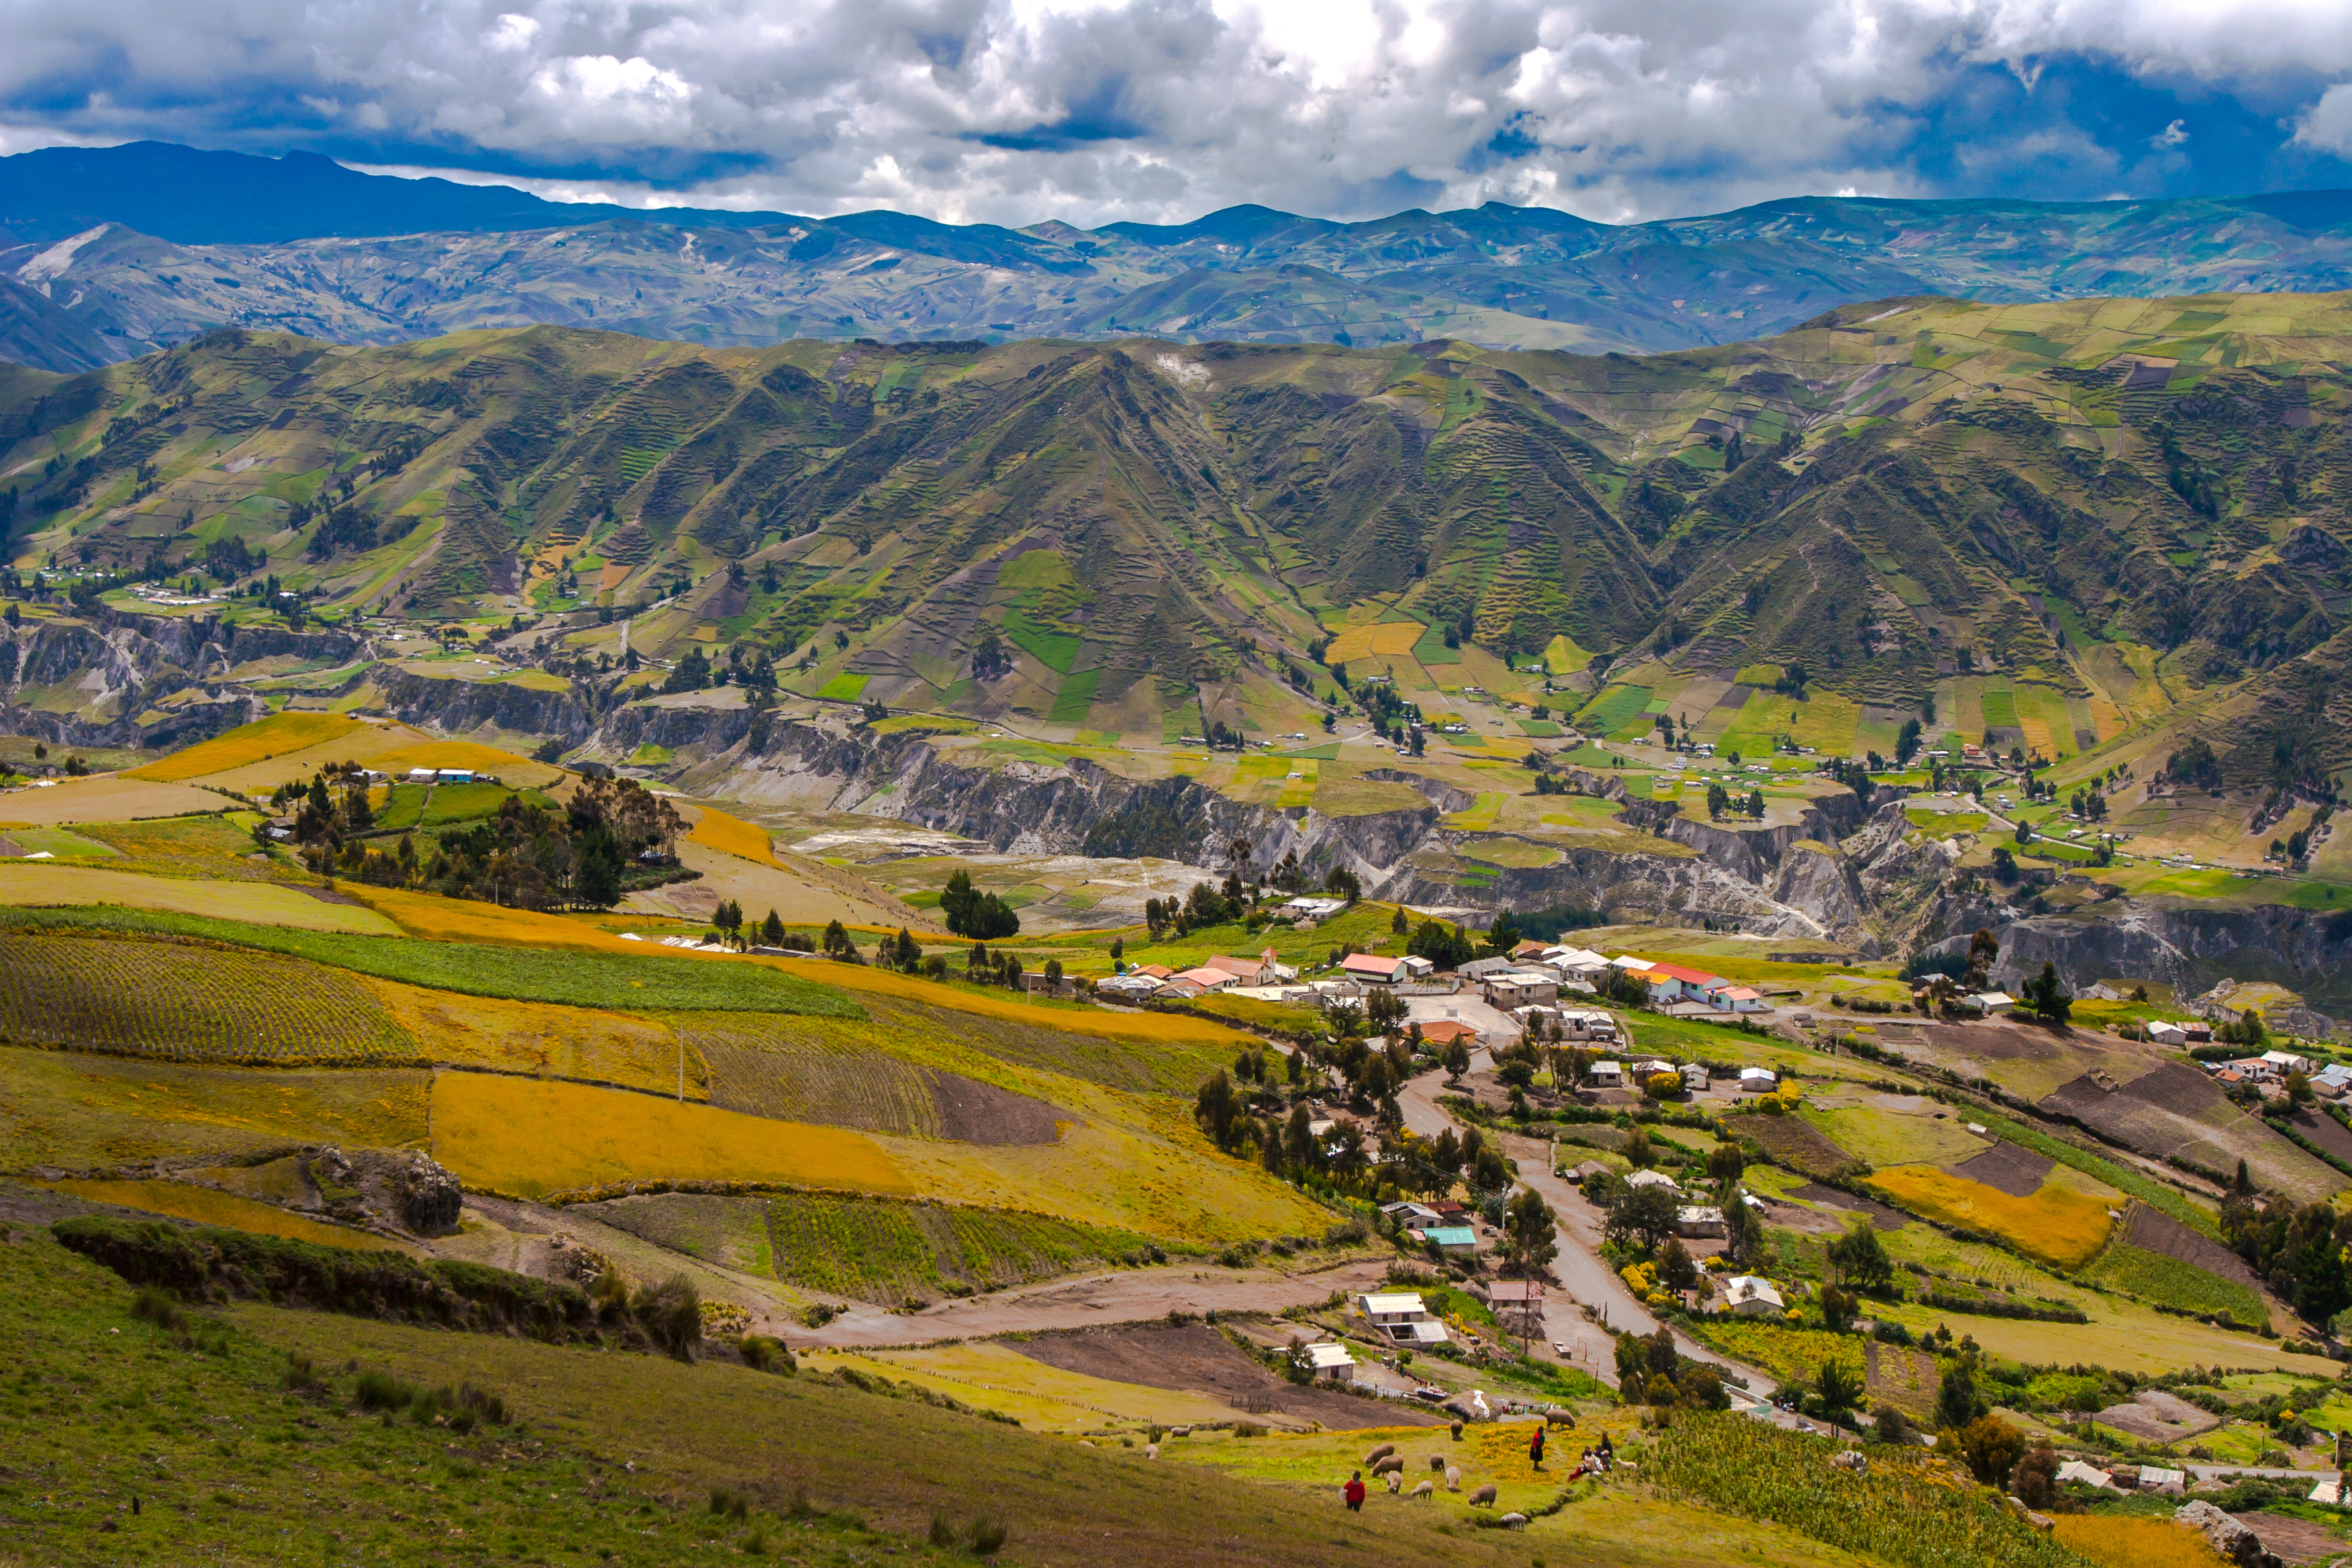 Water sustainability project aims to improve conditions in high Andean communities